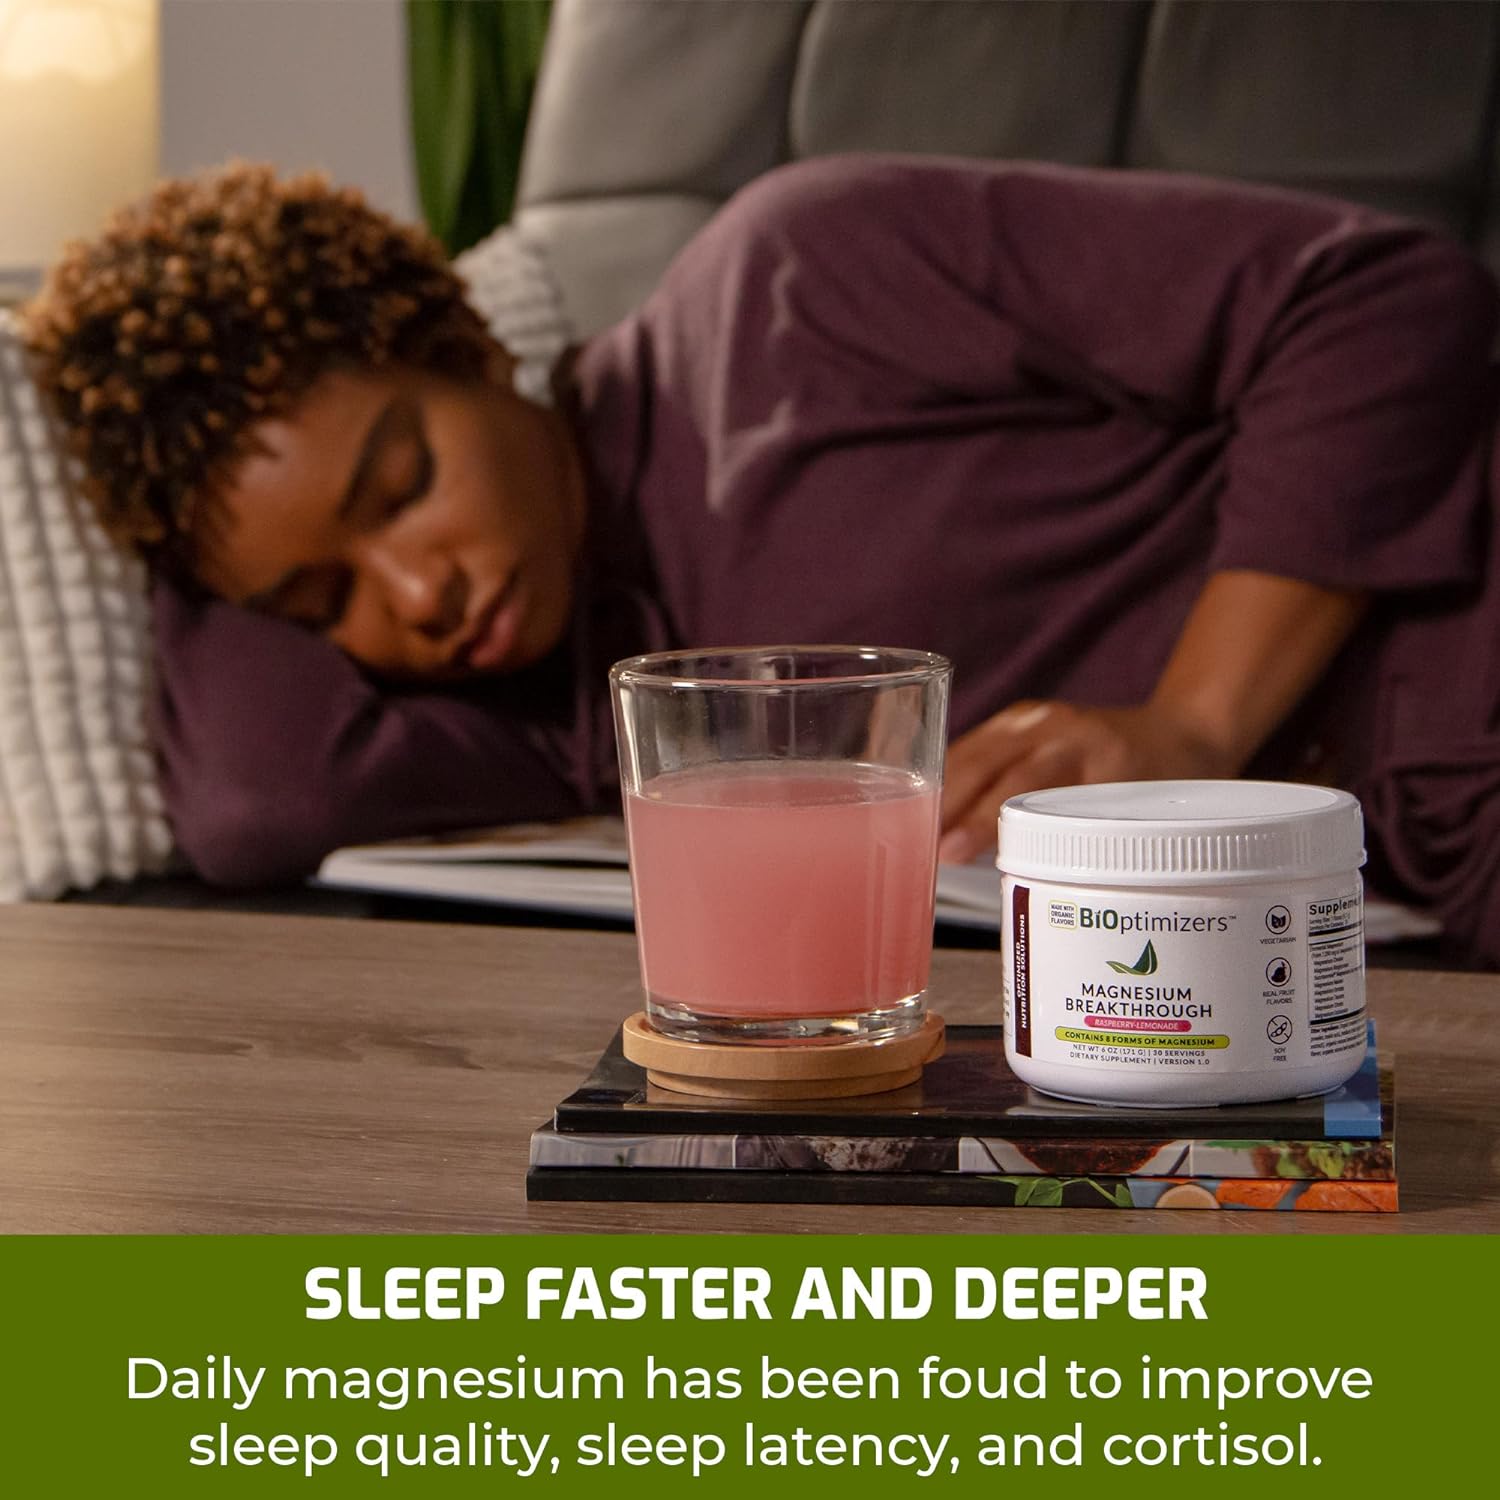 BiOptimizers Magnesium Breakthrough Drink Raspberry Lemonade - 8 Forms of Magnesium: Glycinate, Malate, Citrate, and More - Natural Sleep and Brain Supplement – 6 oz (30 Servings) : Video Games